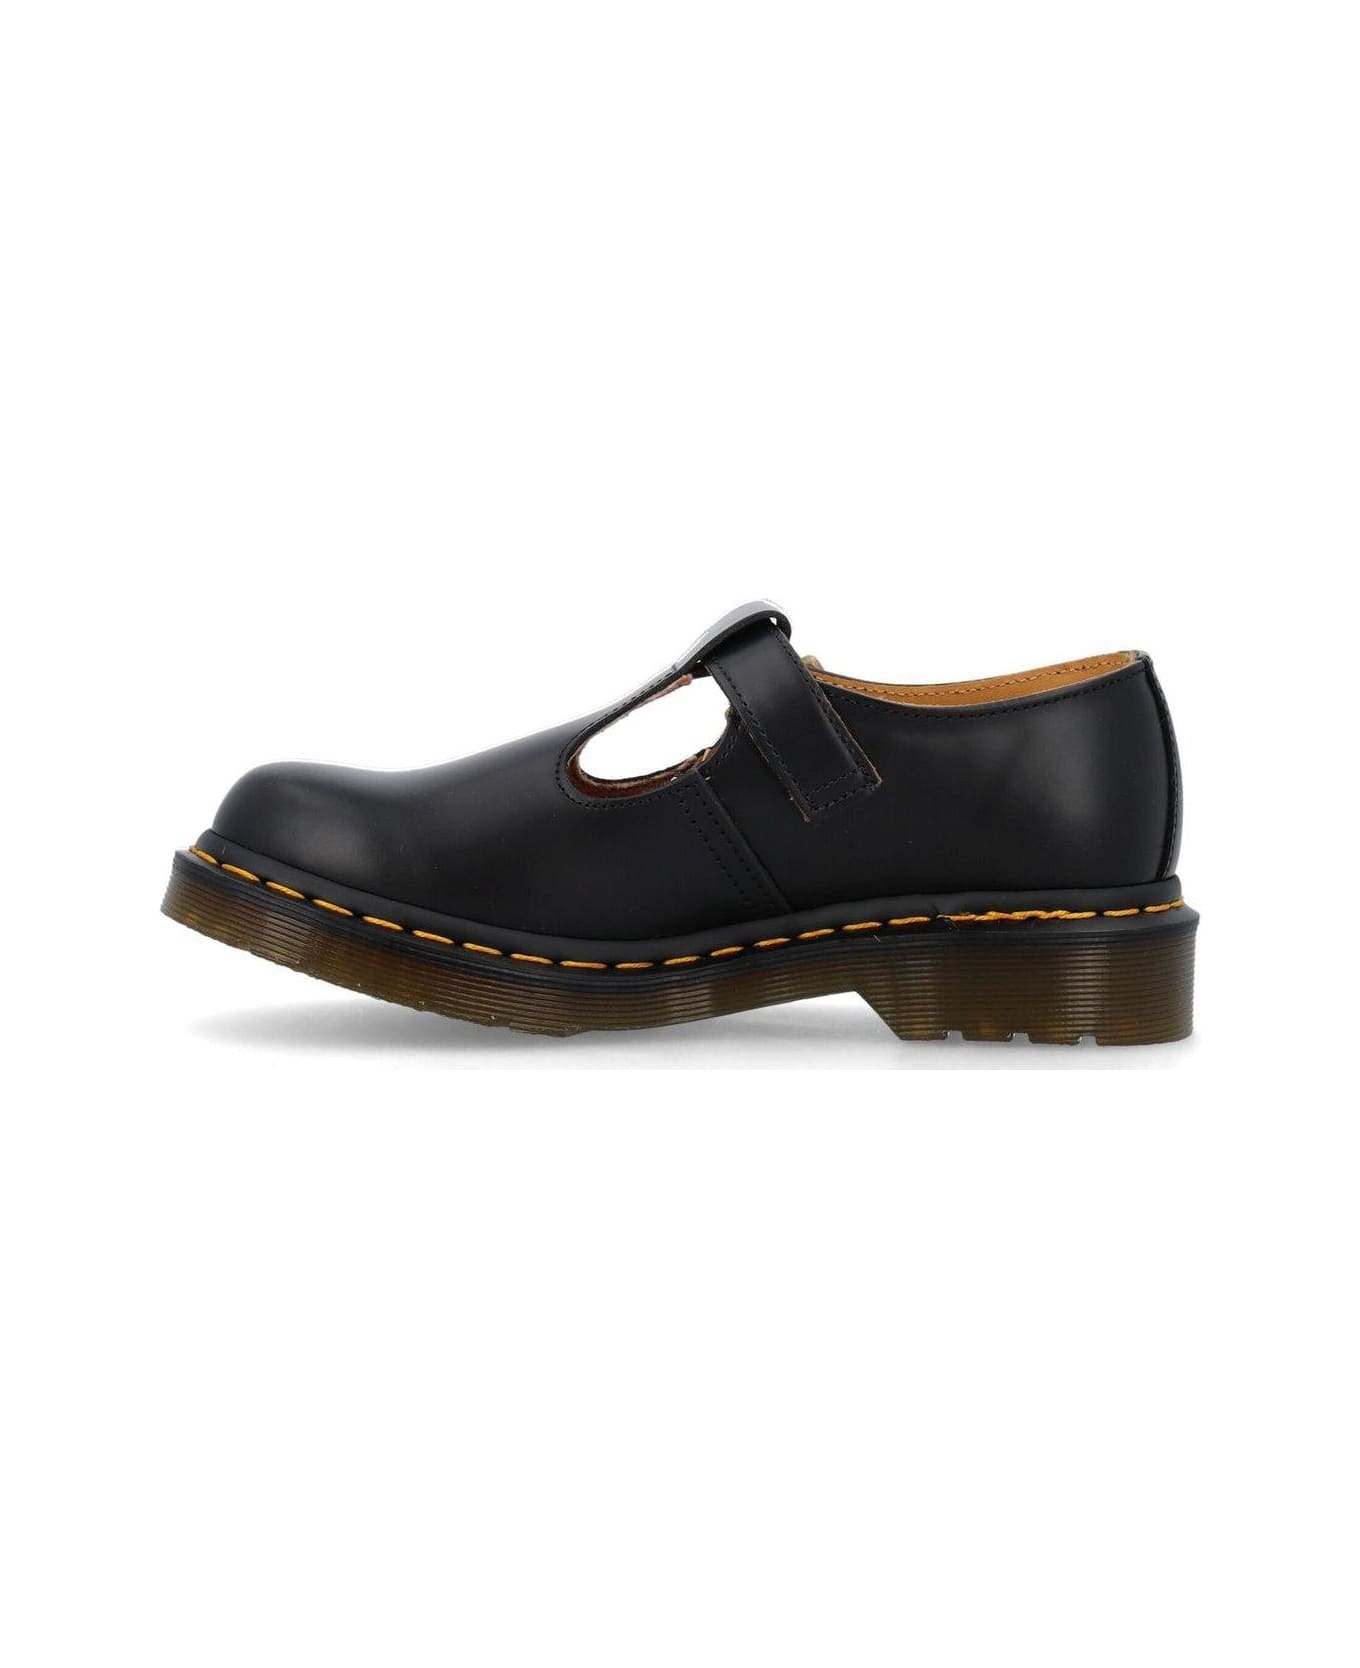 Dr. Martens Polley Mary Jane Flat Shoes - Black Smooth フラットシューズ